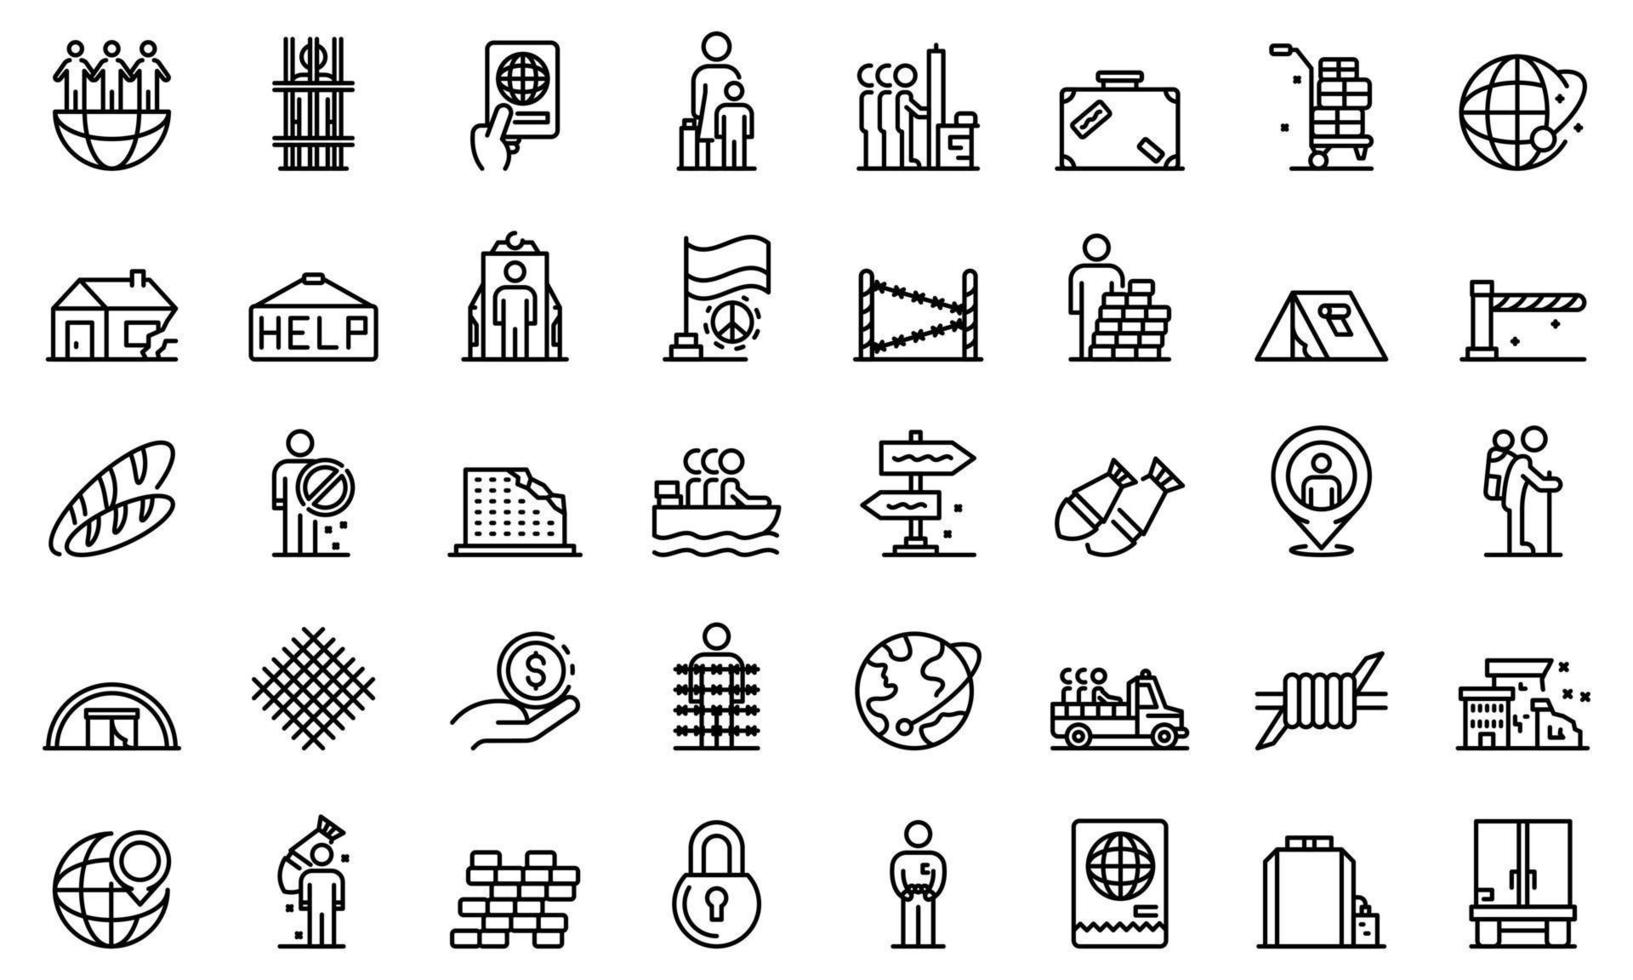 Illegal immigrants icons set, outline style vector